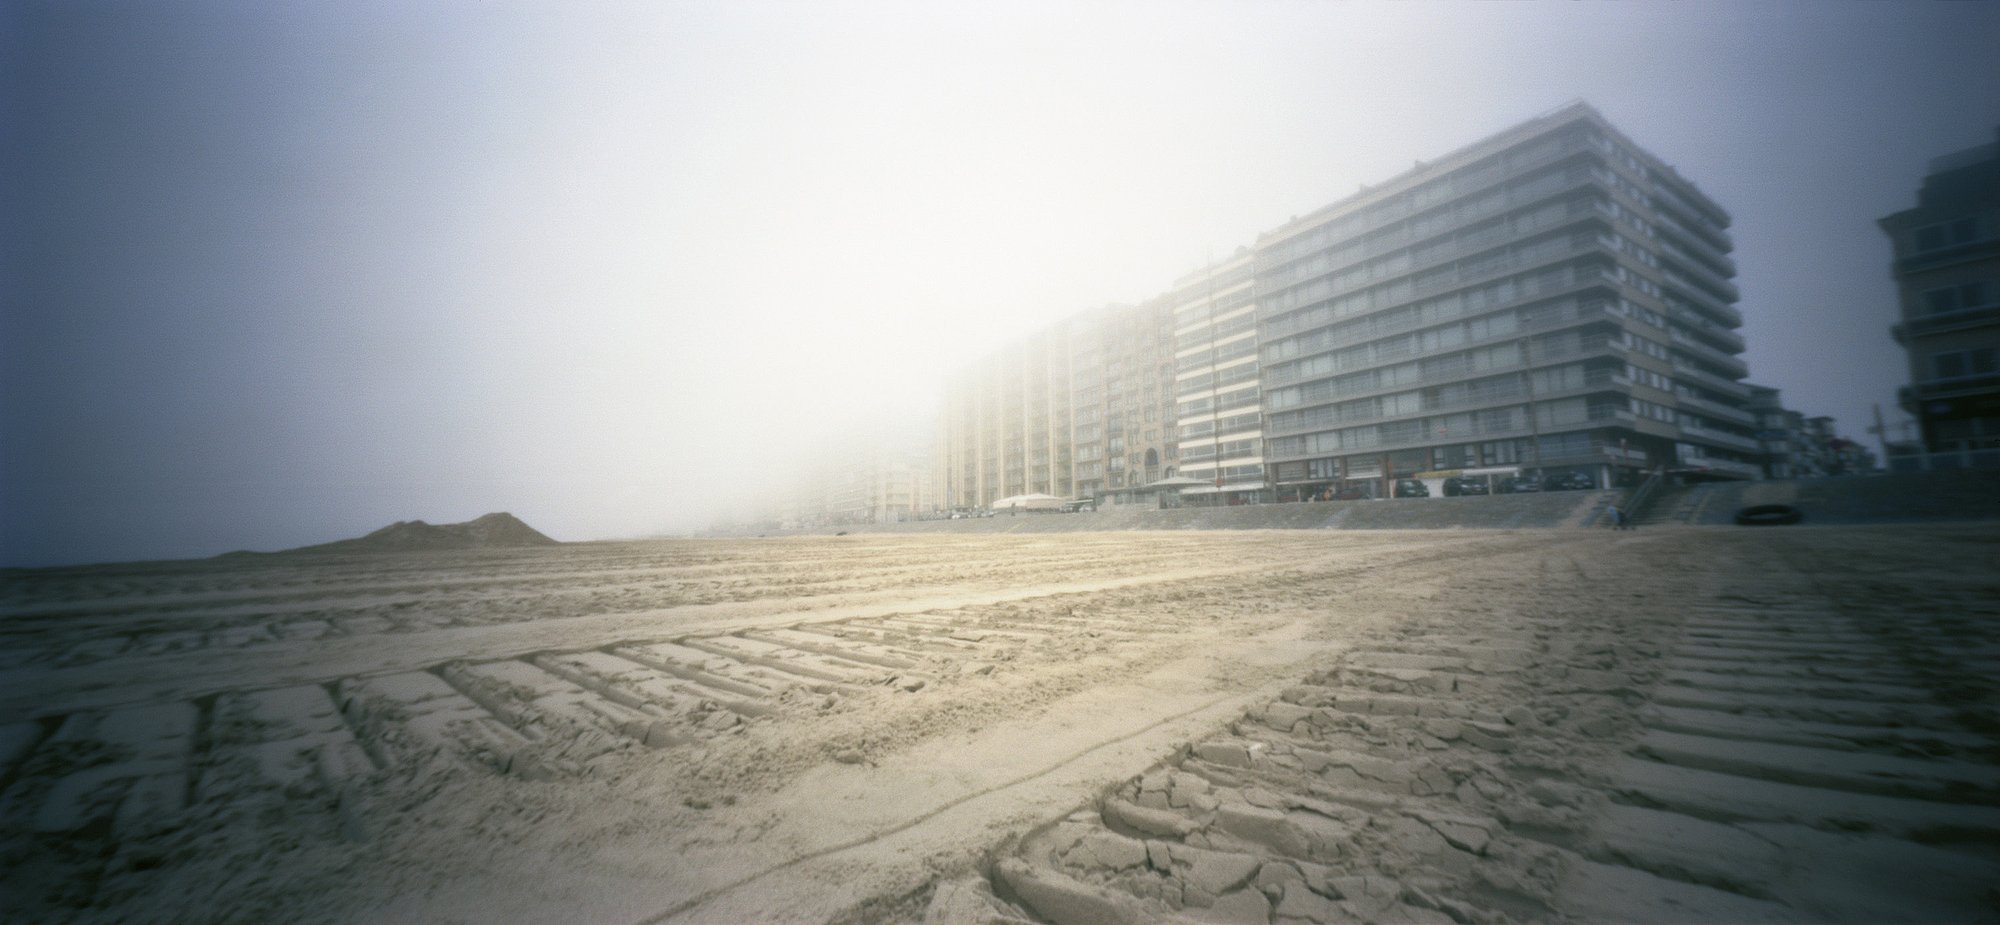 shaping the beach - Oostende. Belgium. 201059 x 128 cm